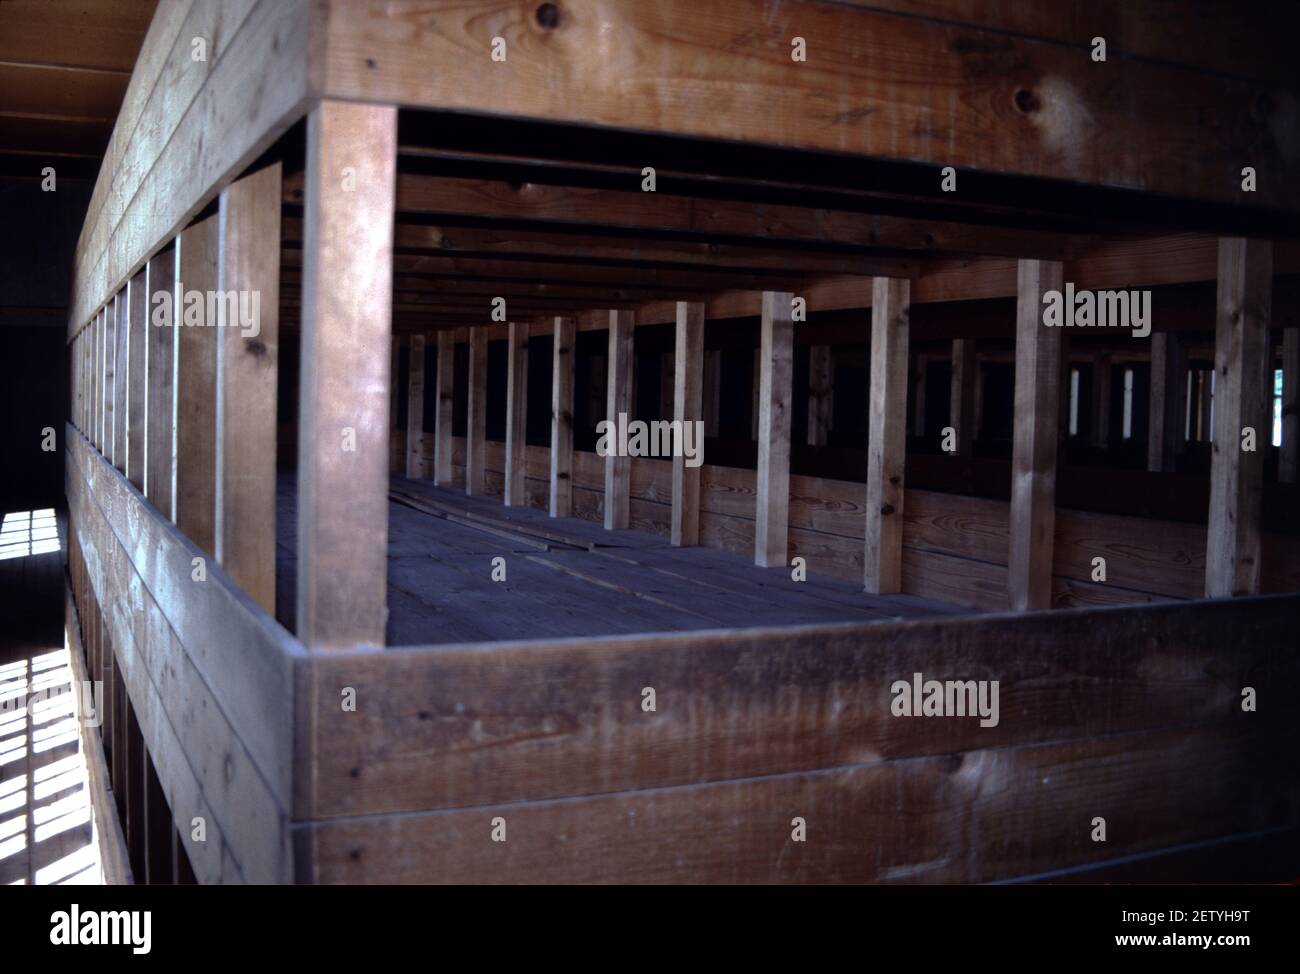 Dachau, Germany. 6/26/1990. Dachau Concentration Camp Museum.  March 22, 1933 to April 29, 1945.  First camp built by the Nazi Reich.  Vintage pictures of barracks, buildings and camp layout. Stock Photo